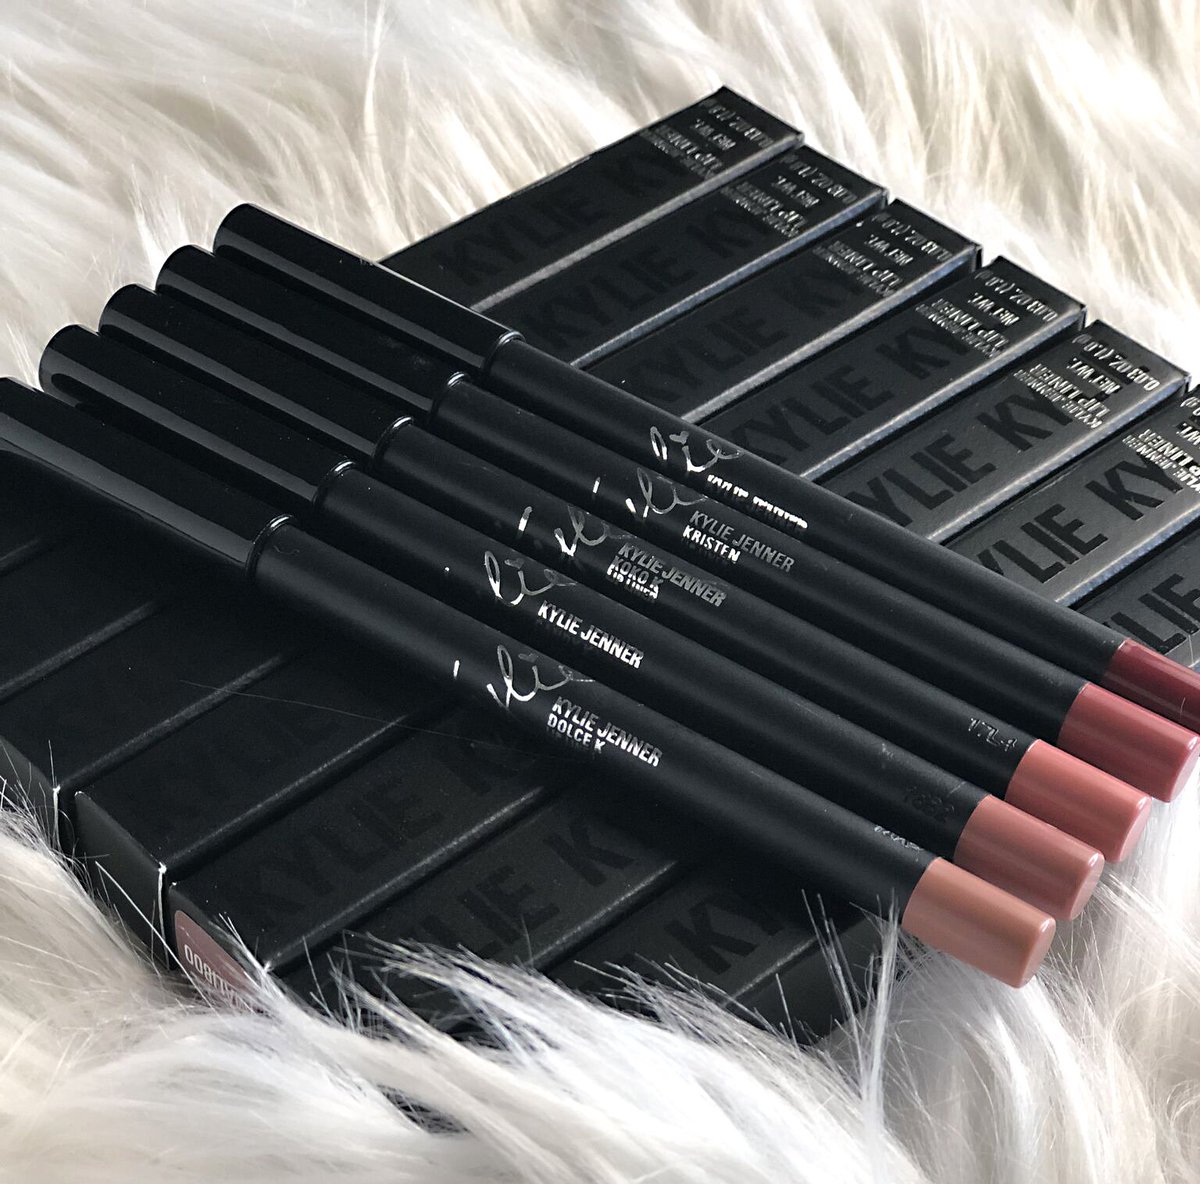 A friday surprise for you guys ???? just launched 6 NEW lip liners at https://t.co/bDaiohhXCV! https://t.co/6bWshn7Kmo